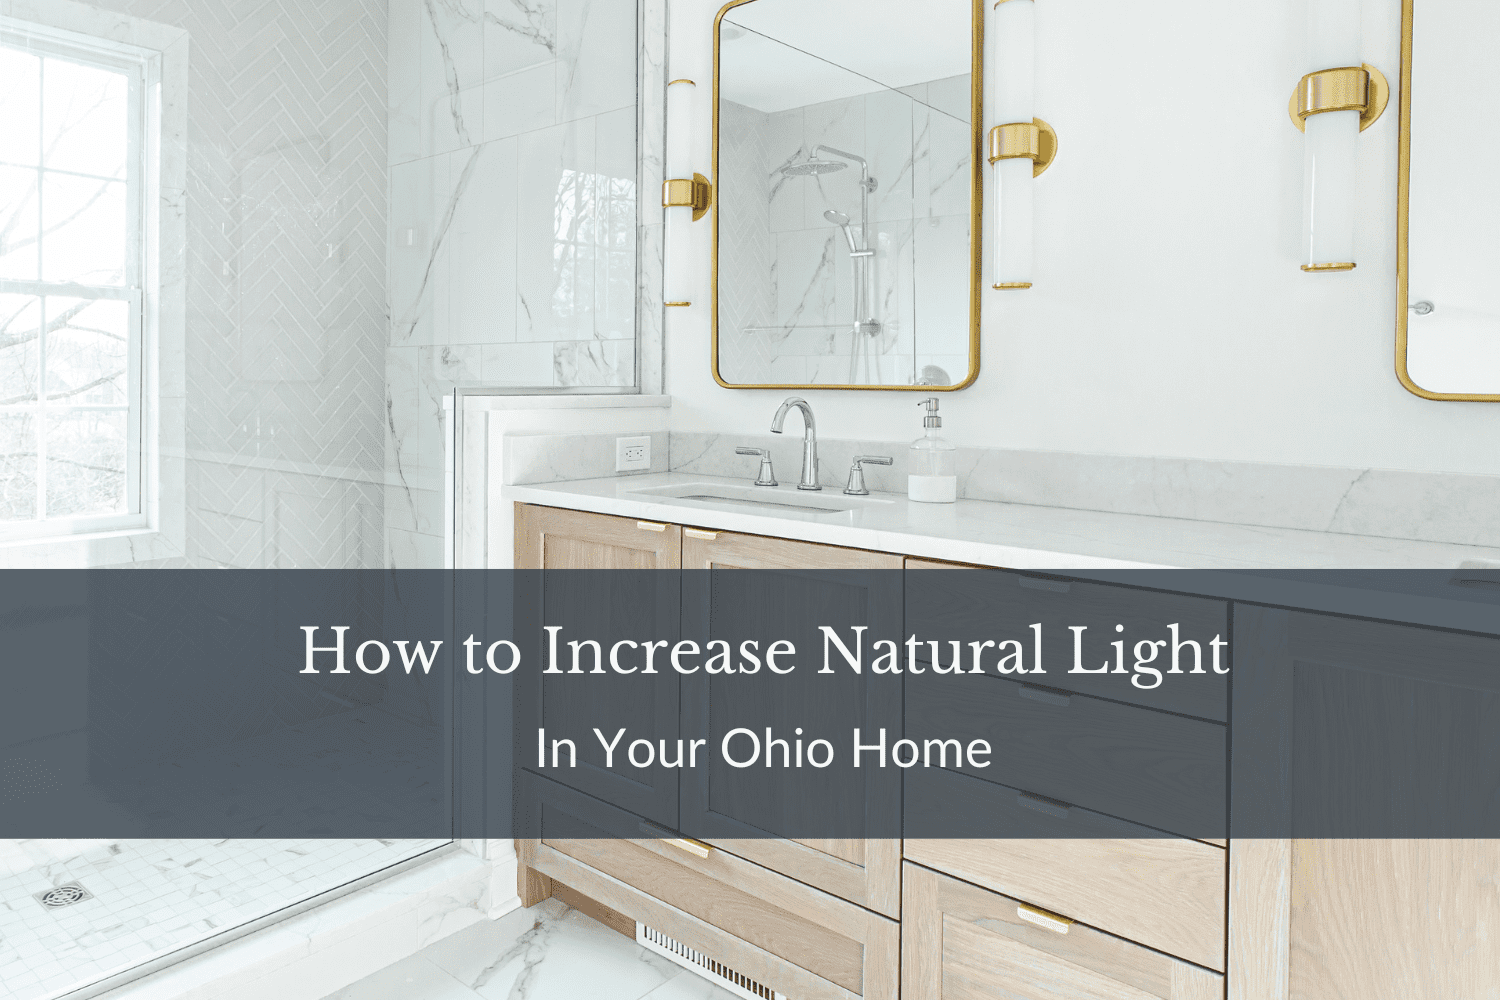 How to Increase Natural Light in Your Home